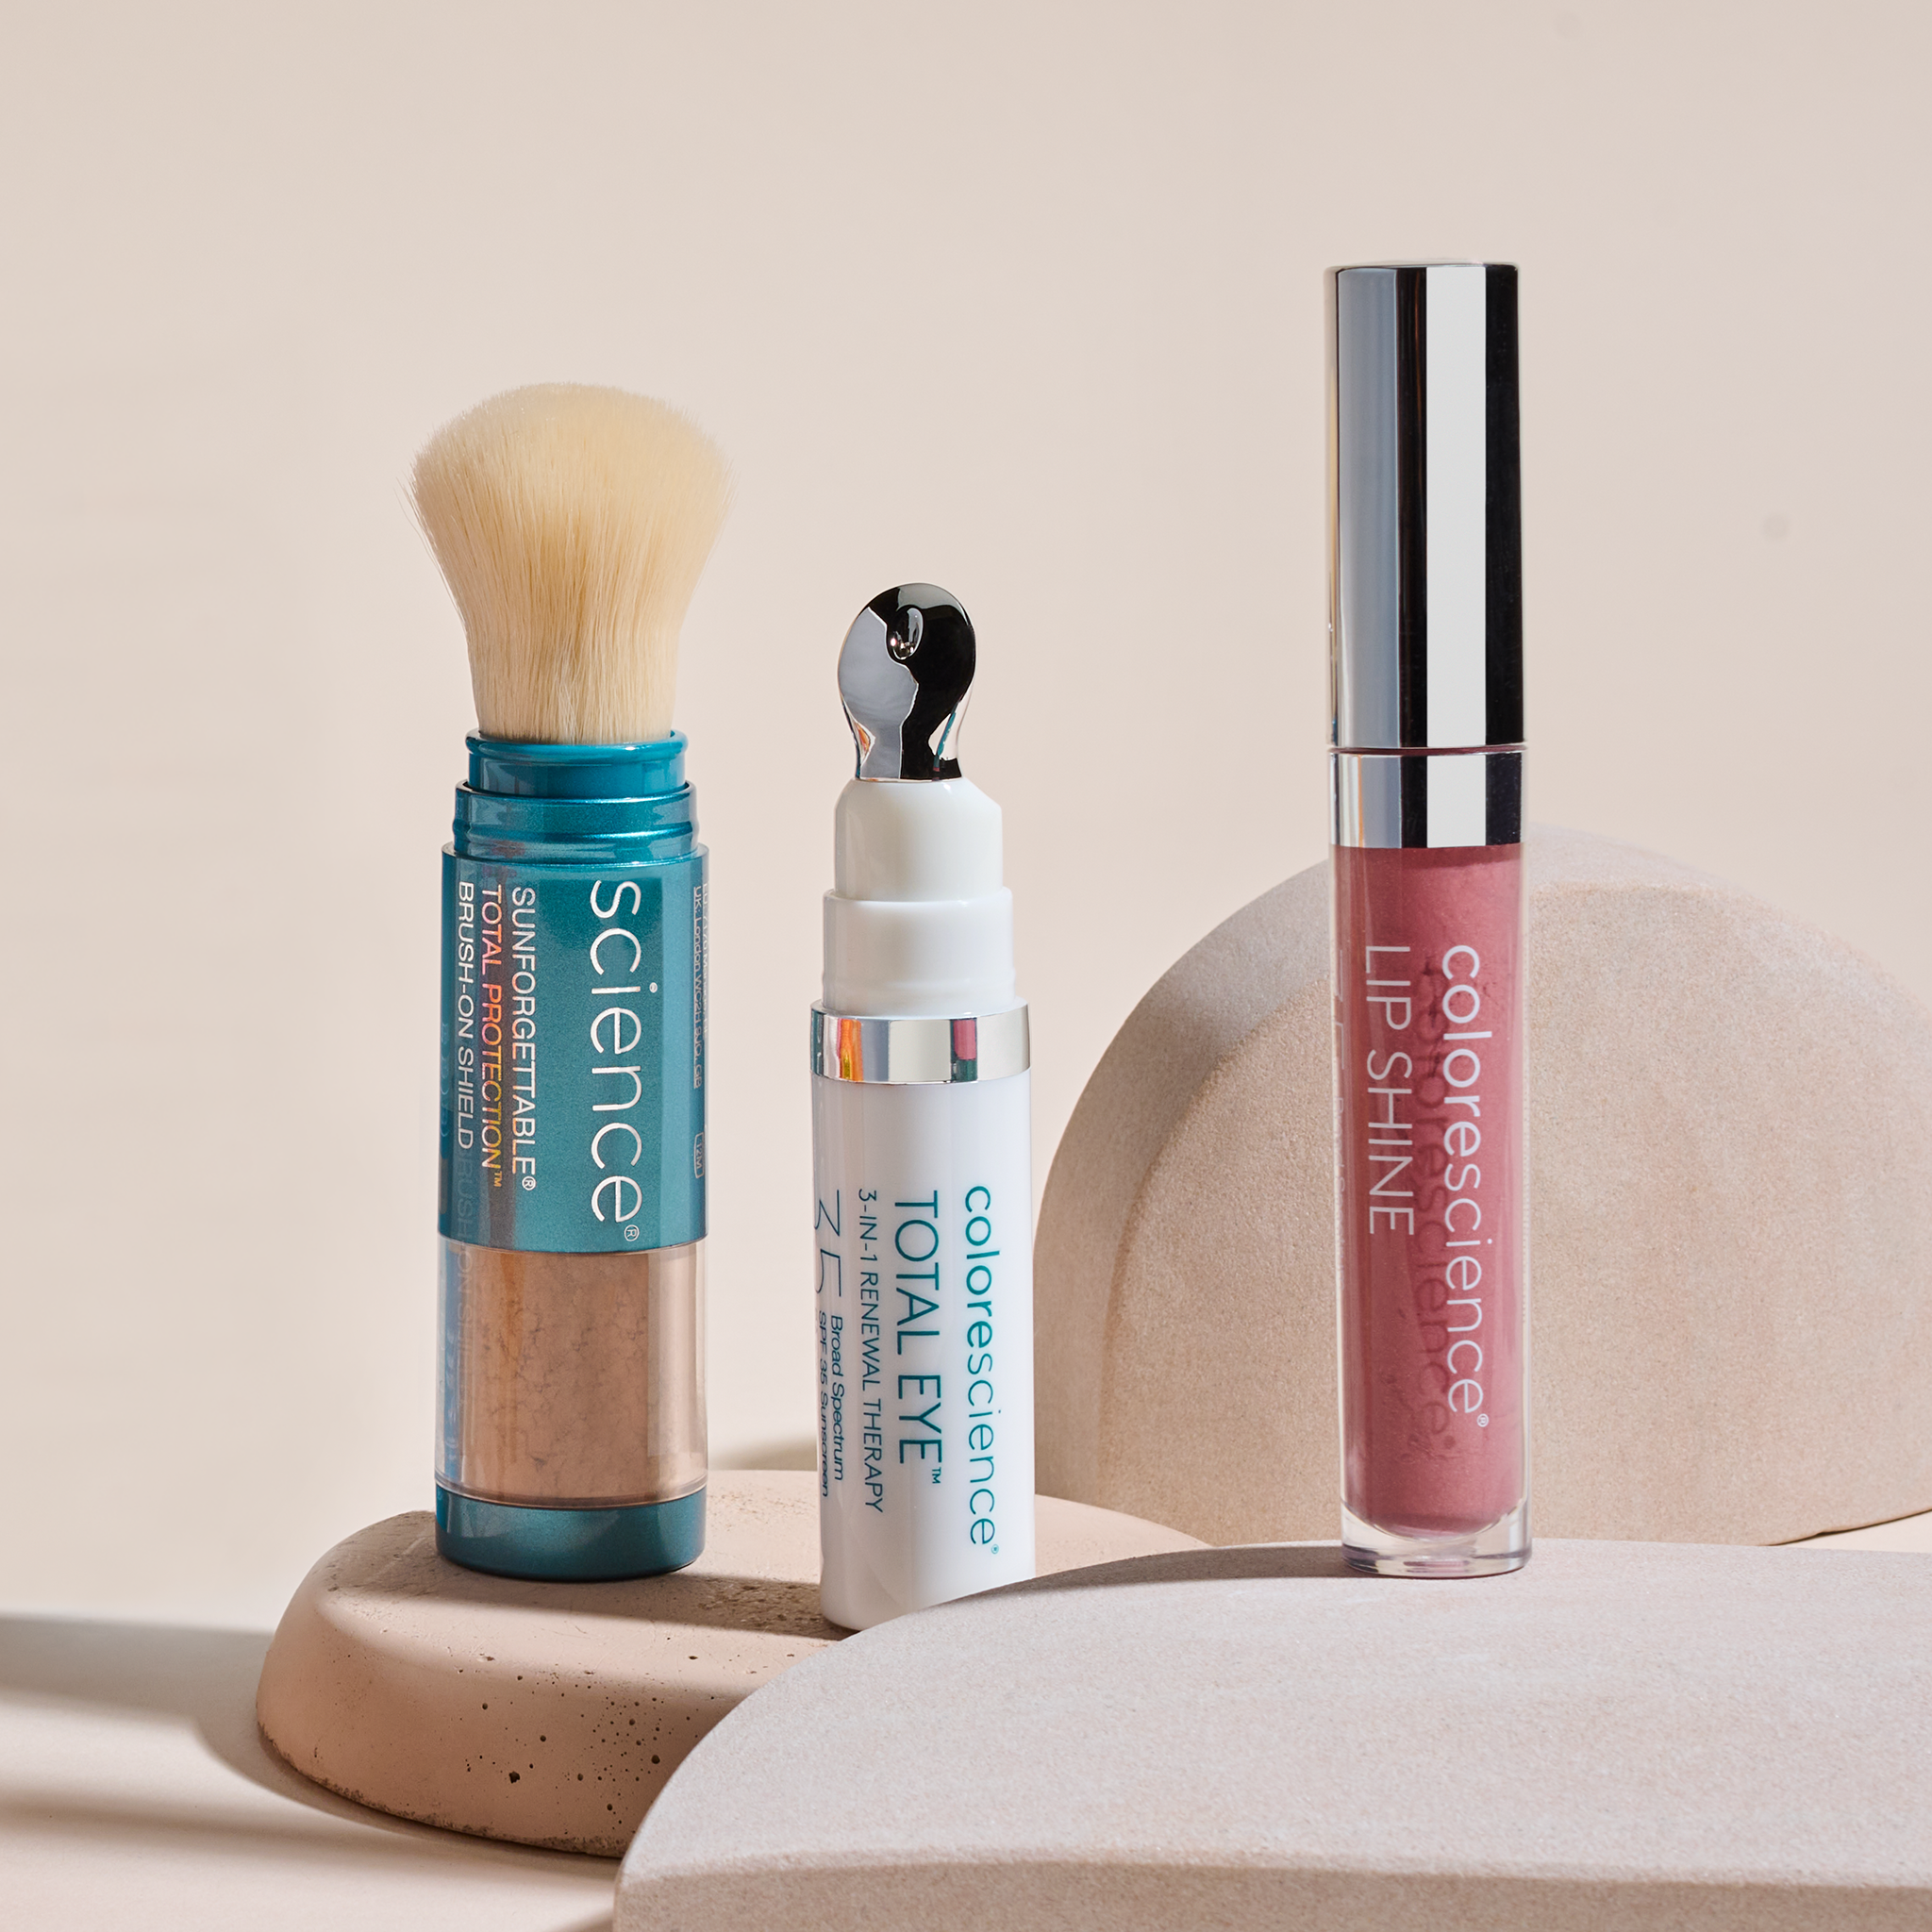 Must Haves for Mom: Total Eye 3-in-1 Renewal Therapy SPF 35, Sunforgettable Total Protection Brush-On Shield Glow SPF 50, Lip Shine SPF 35 Blush Glow || all